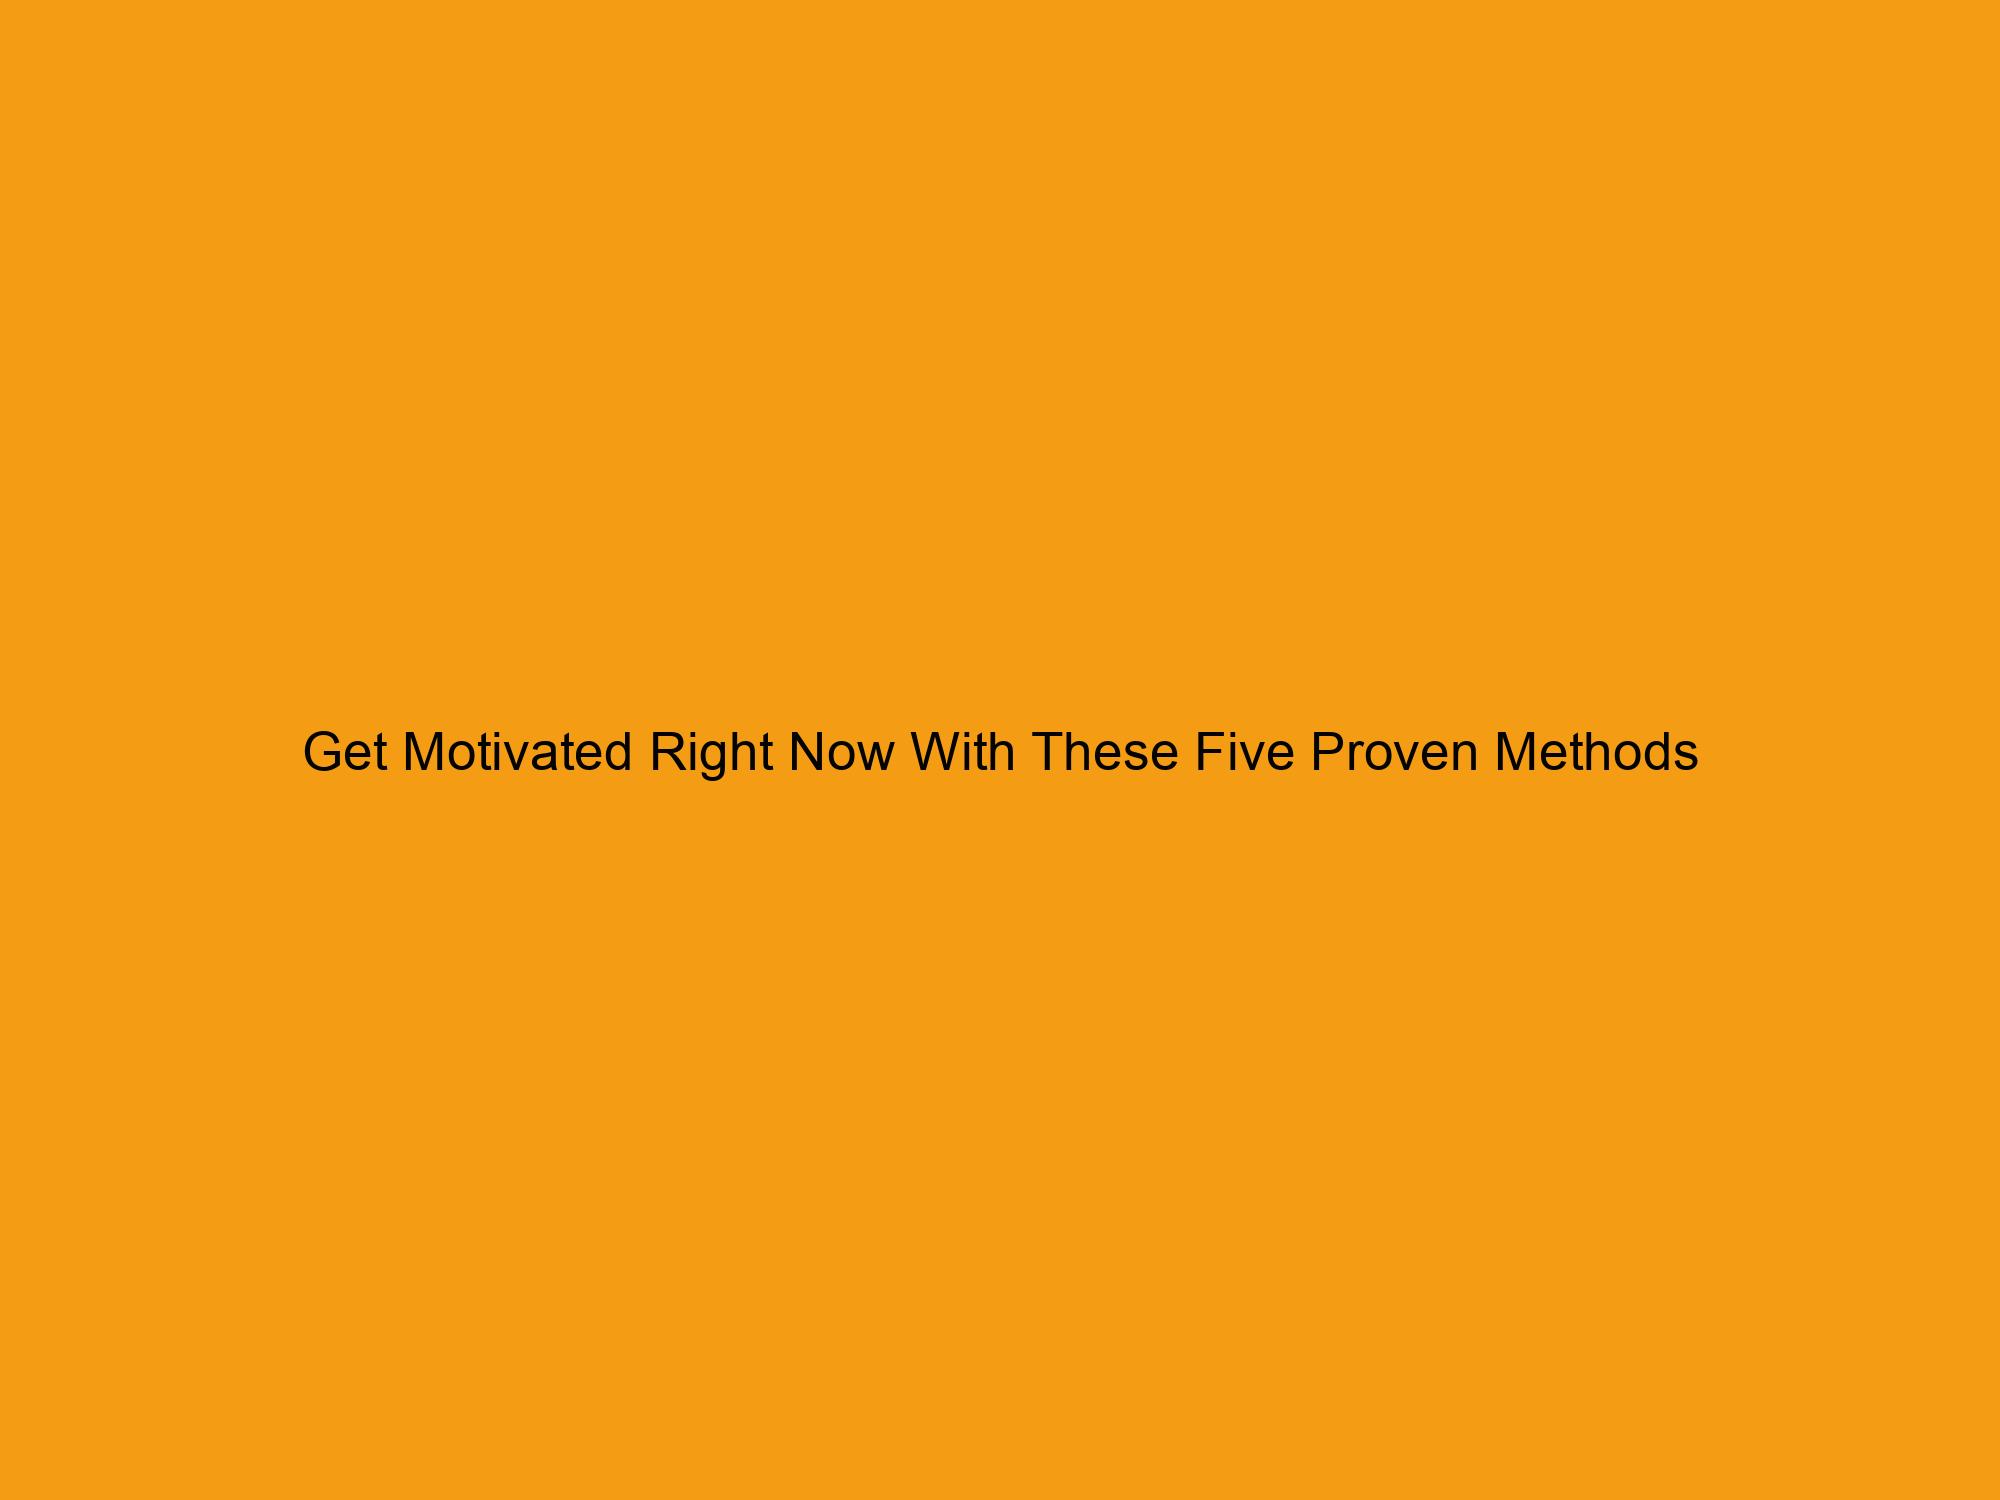 Get Motivated Right Now With These Five Proven Methods